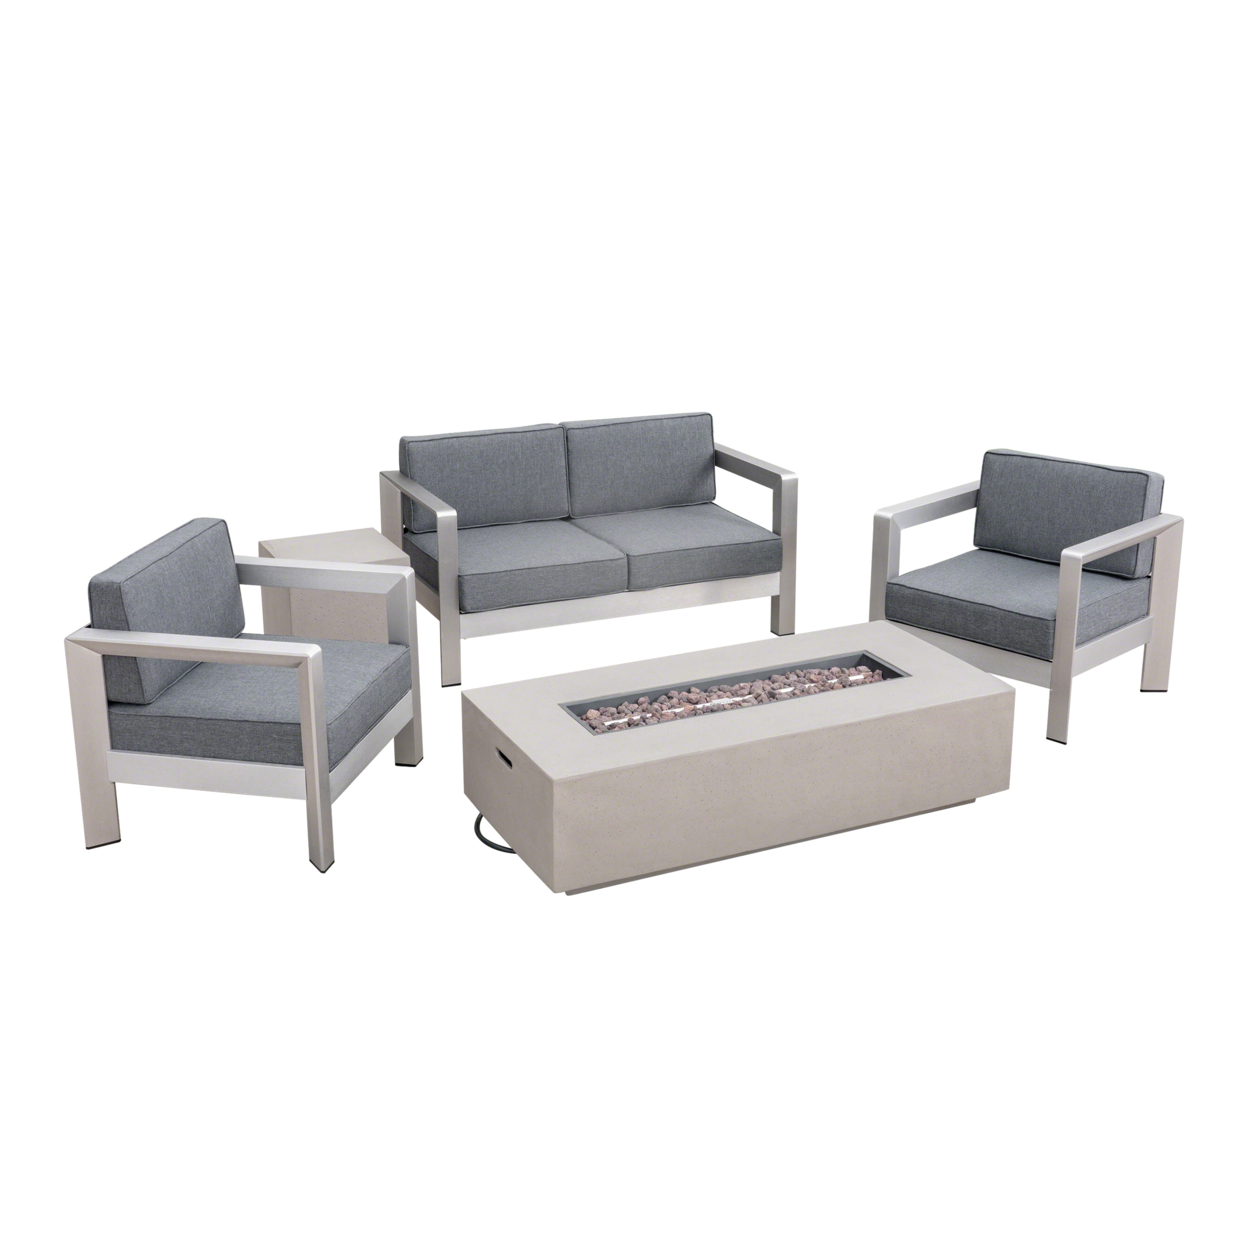 Pony Outdoor 4-Seater Aluminum Chat Set With Fire Pit And Tank Holder - Silver + Dark Gray + Light Gray